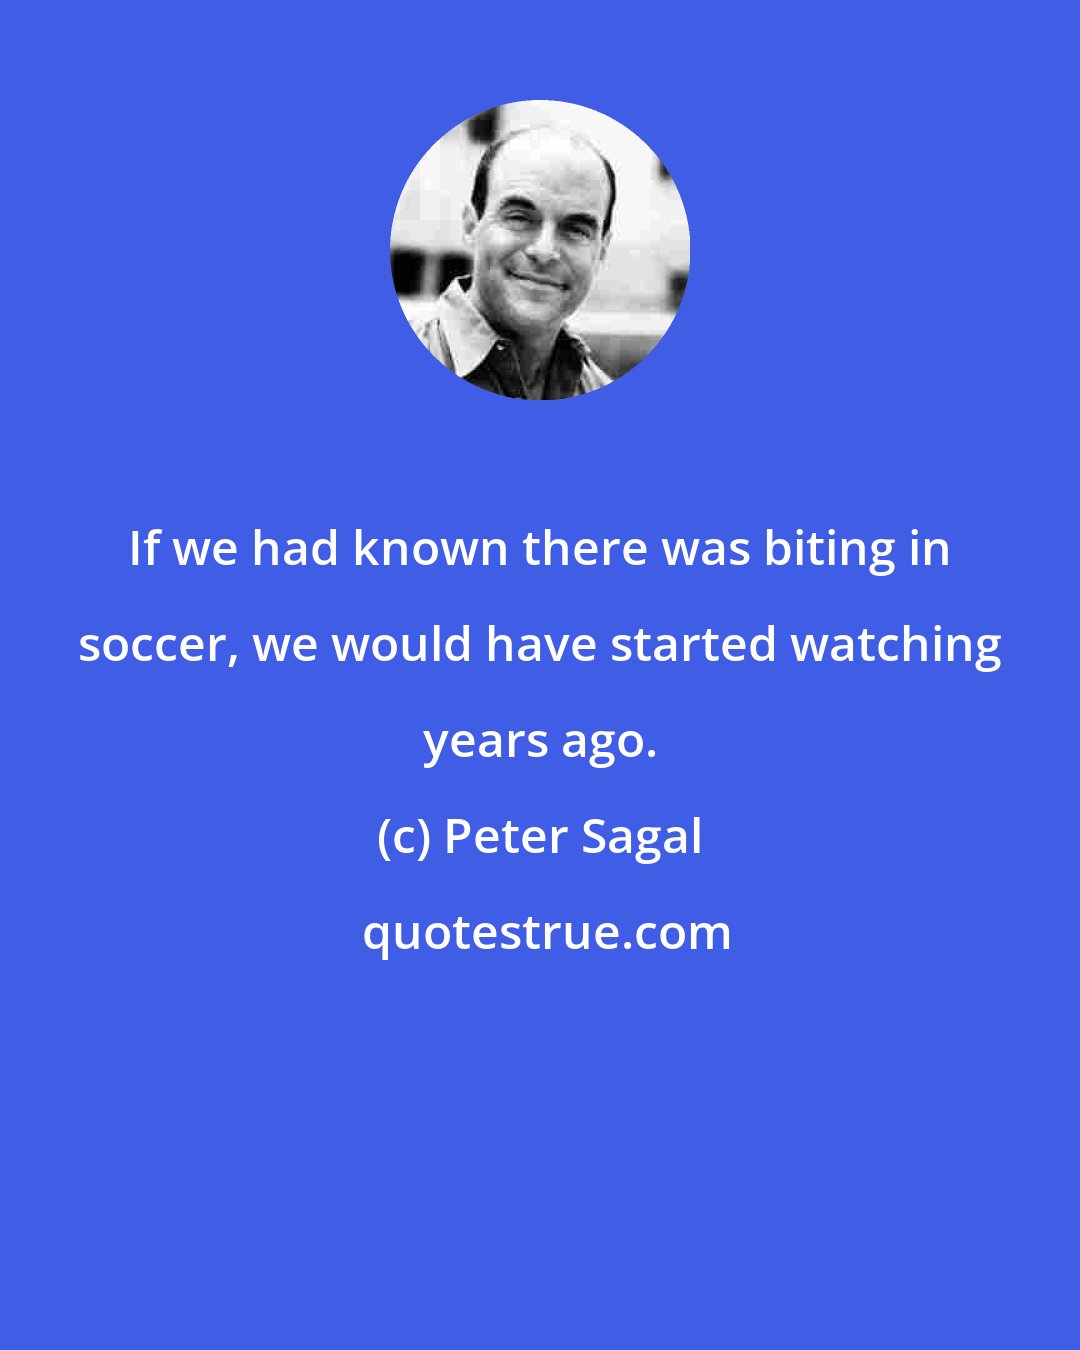 Peter Sagal: If we had known there was biting in soccer, we would have started watching years ago.